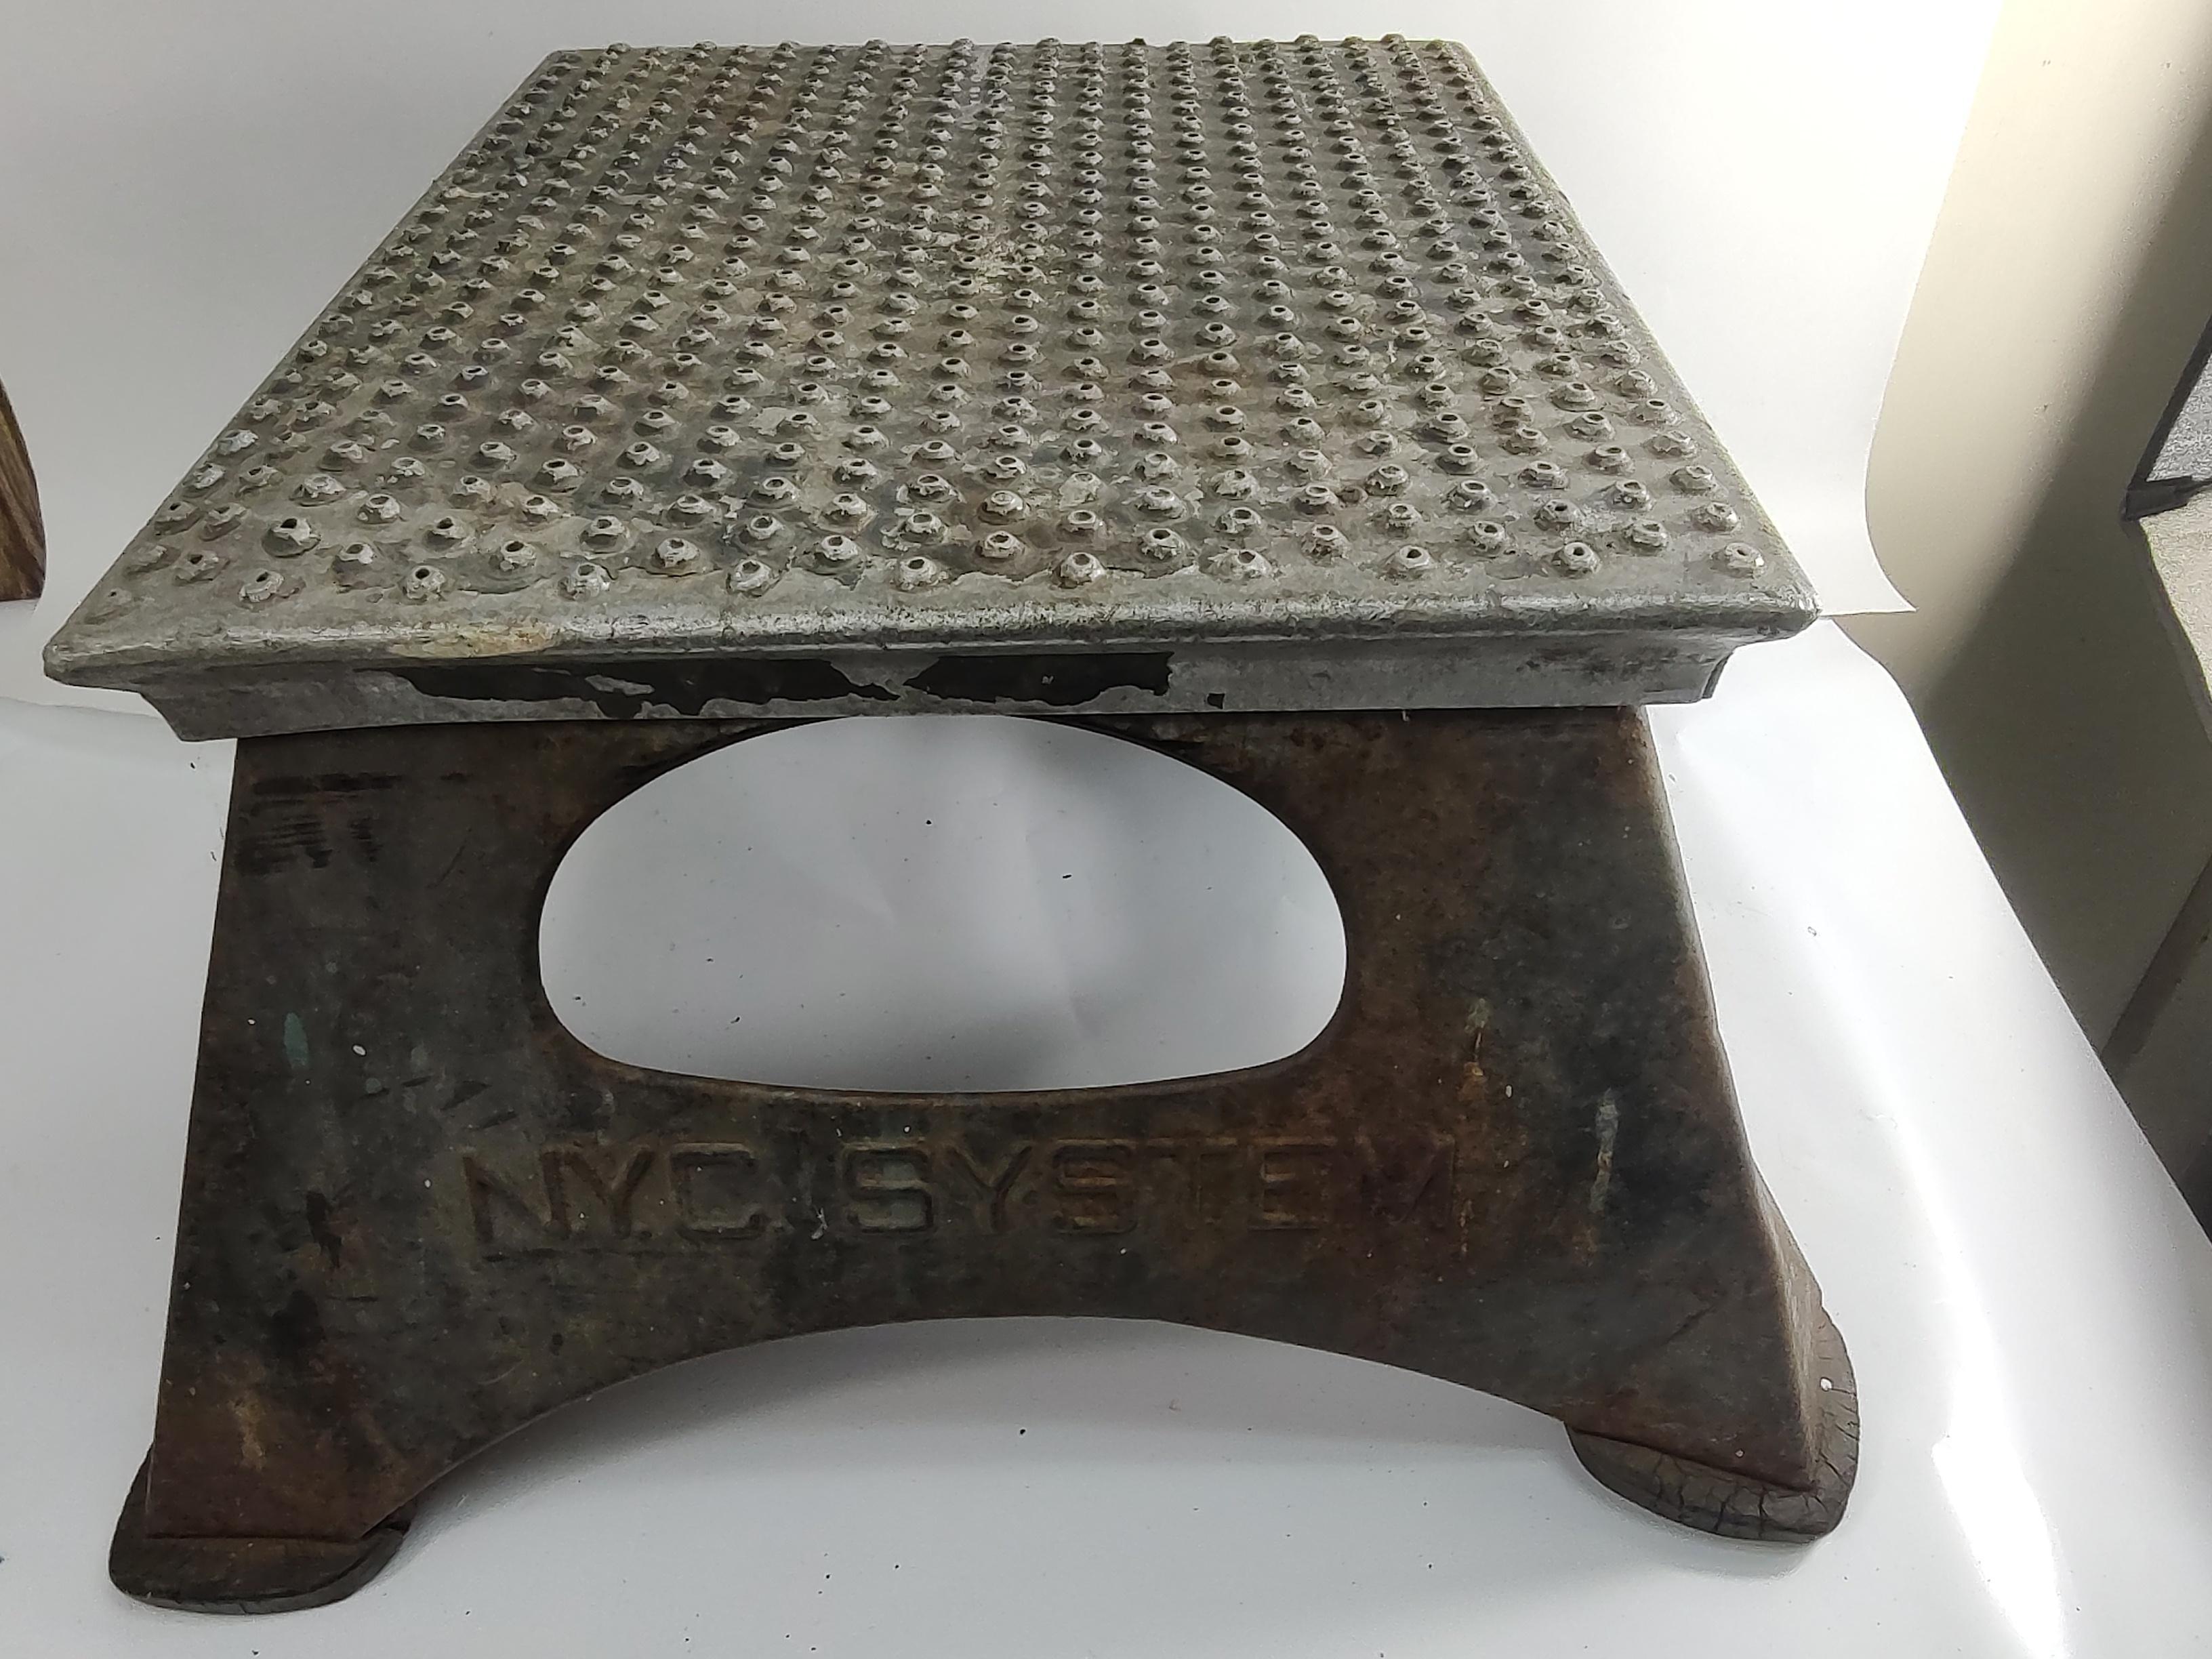 Mid-20th Century Art Deco Step Stool for New York Central Railroad System C1938